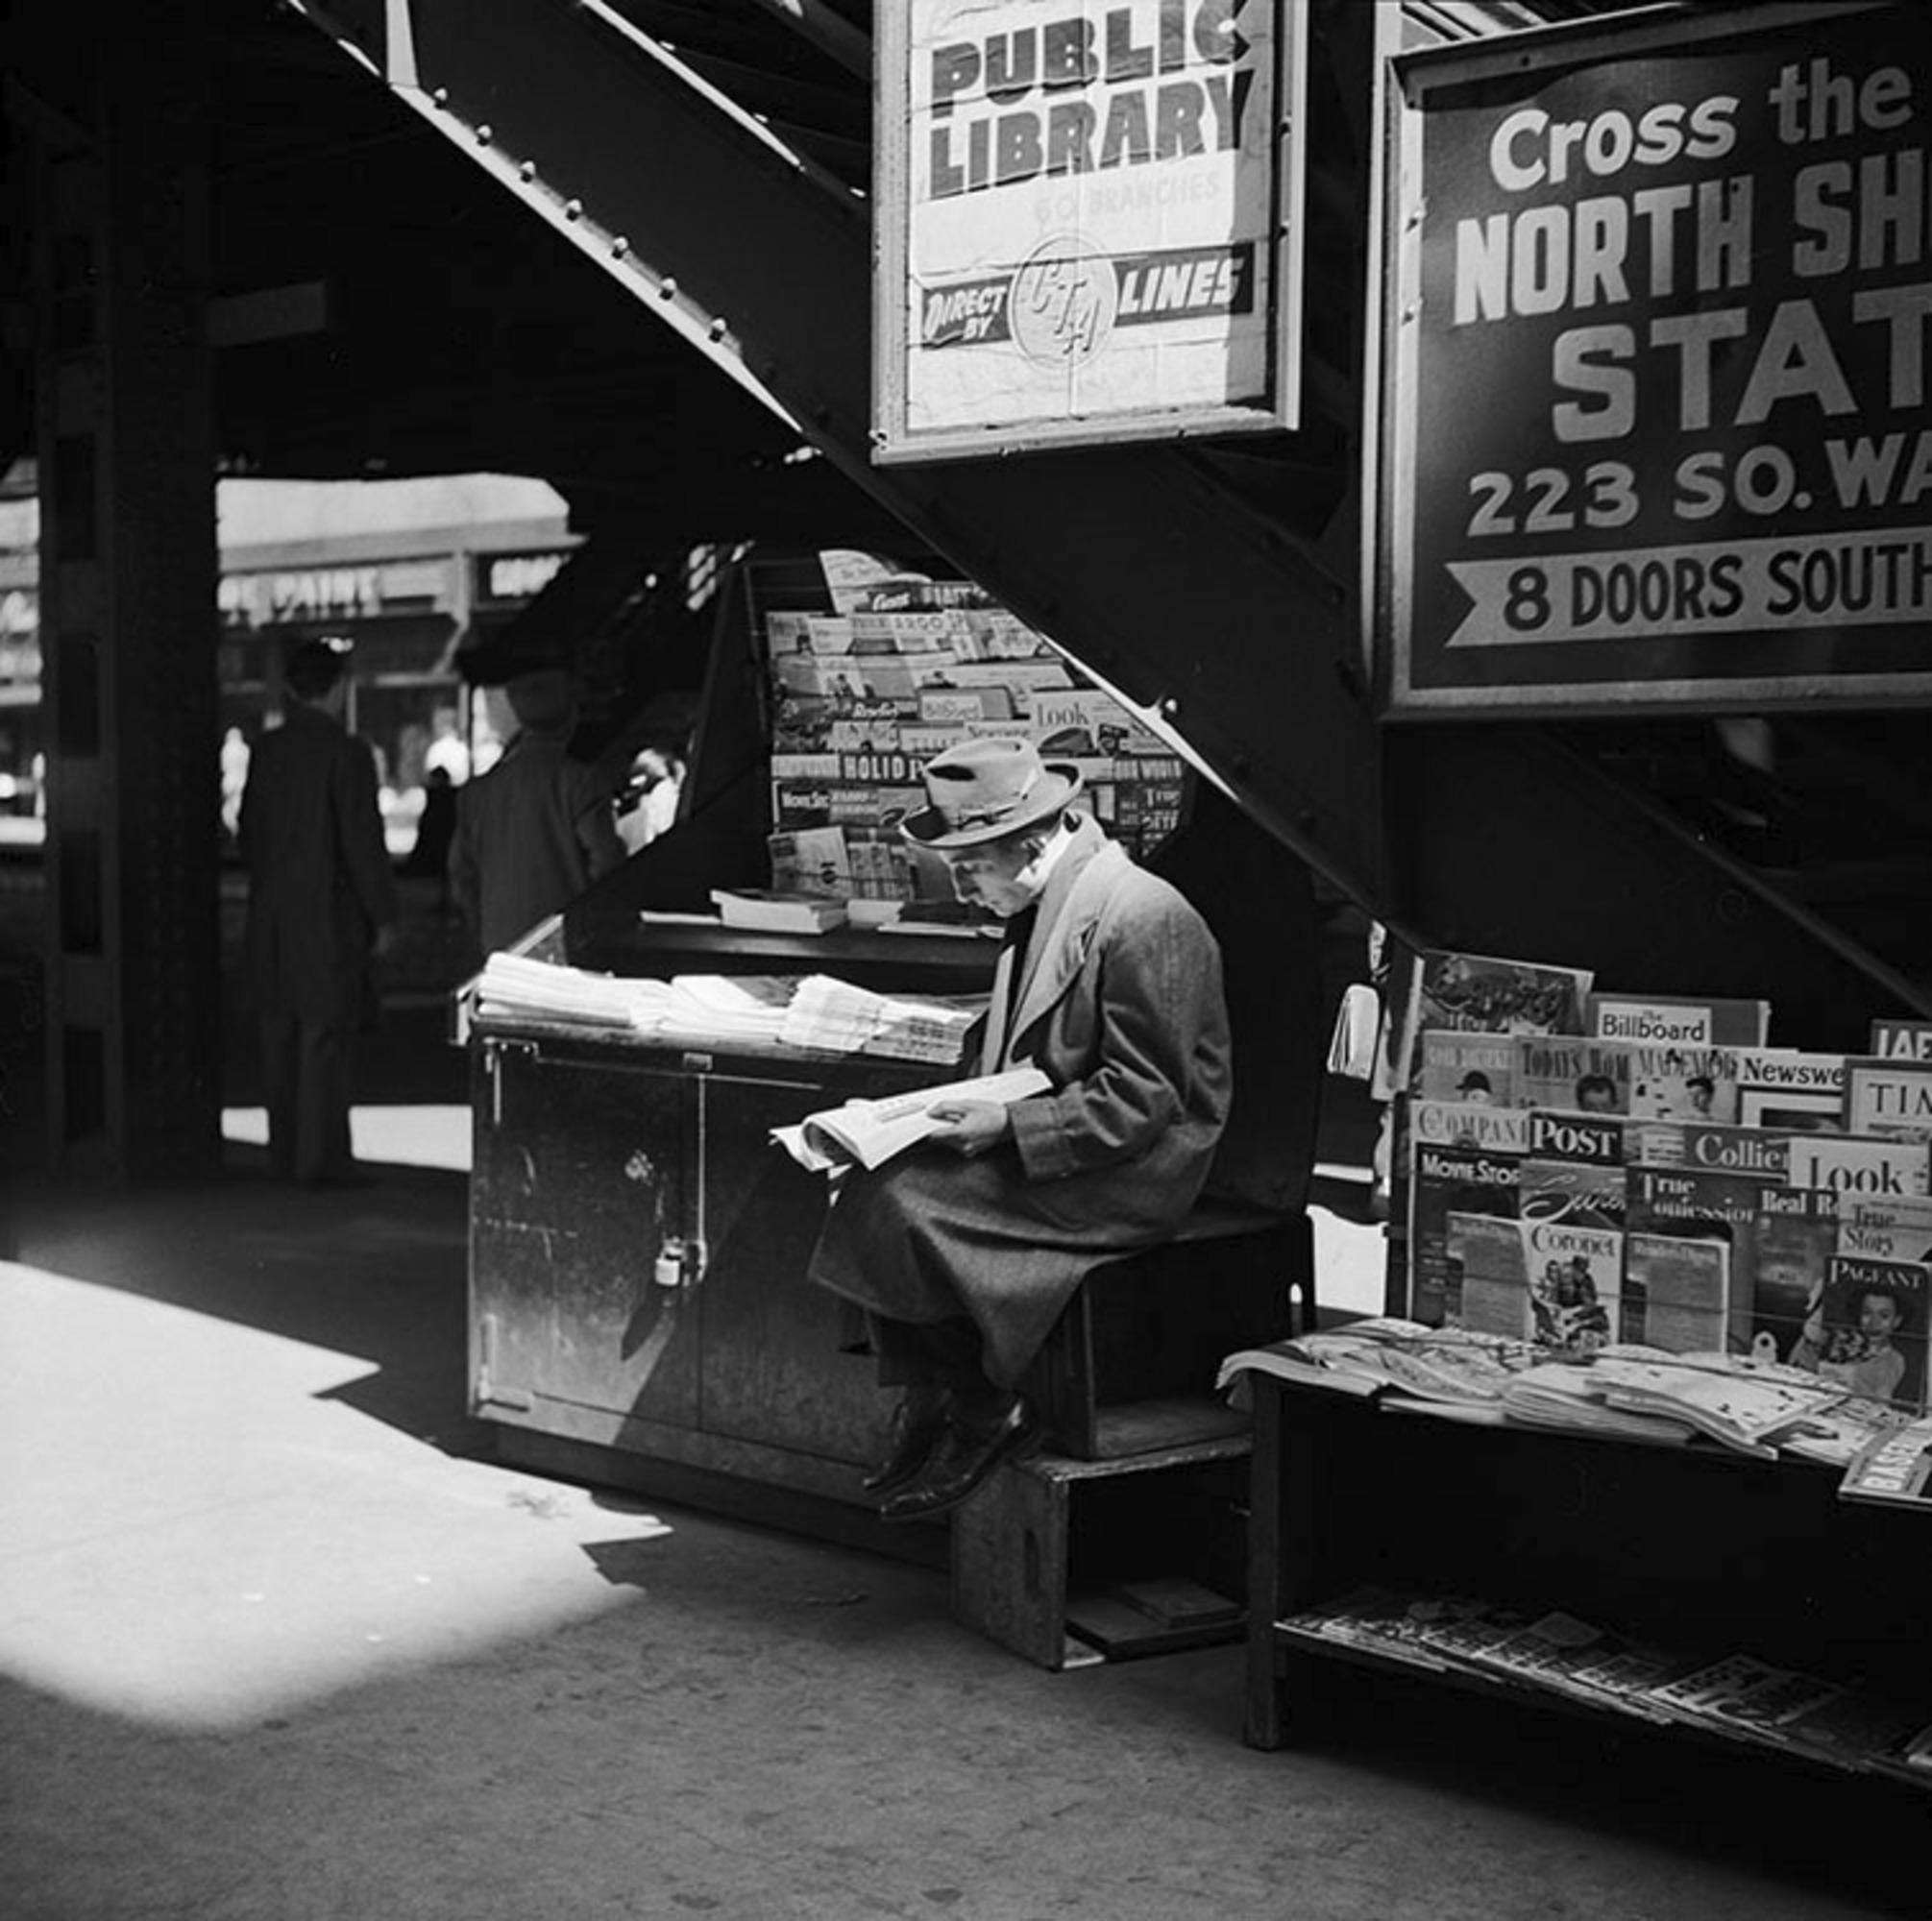 Estate-stamped, gelatin-print silver

Portrait of a man reading Billboard Magazine at a newstand, 1950s, Chicago, USA.

Available sizes: 
16”x20" Edition of 25
20”x24" Edition of 25
30”x30" Edition of 25
48”x48” Edition of 25

This photograph will